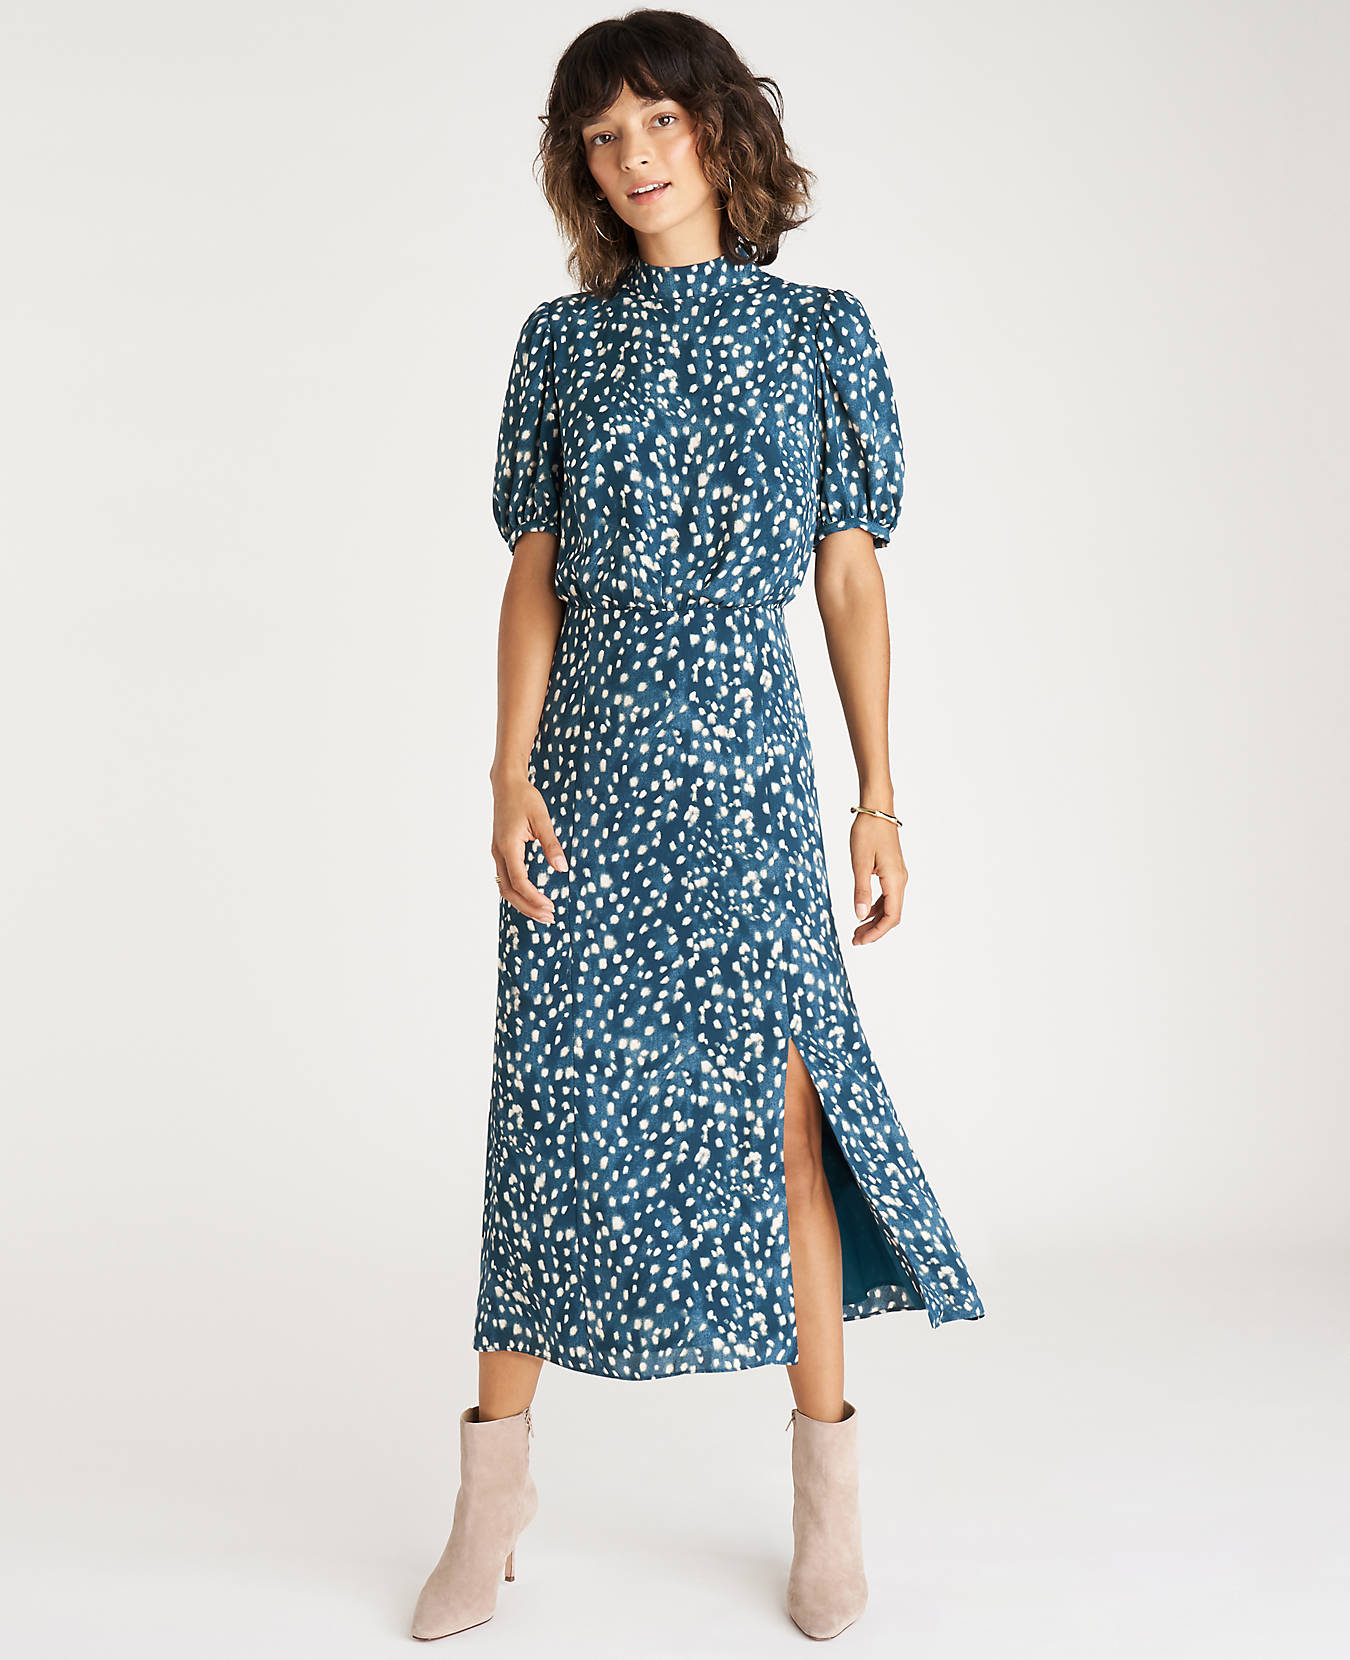 Ann Taylor Sale | Extra 40% Off Clearance + $100 off $200